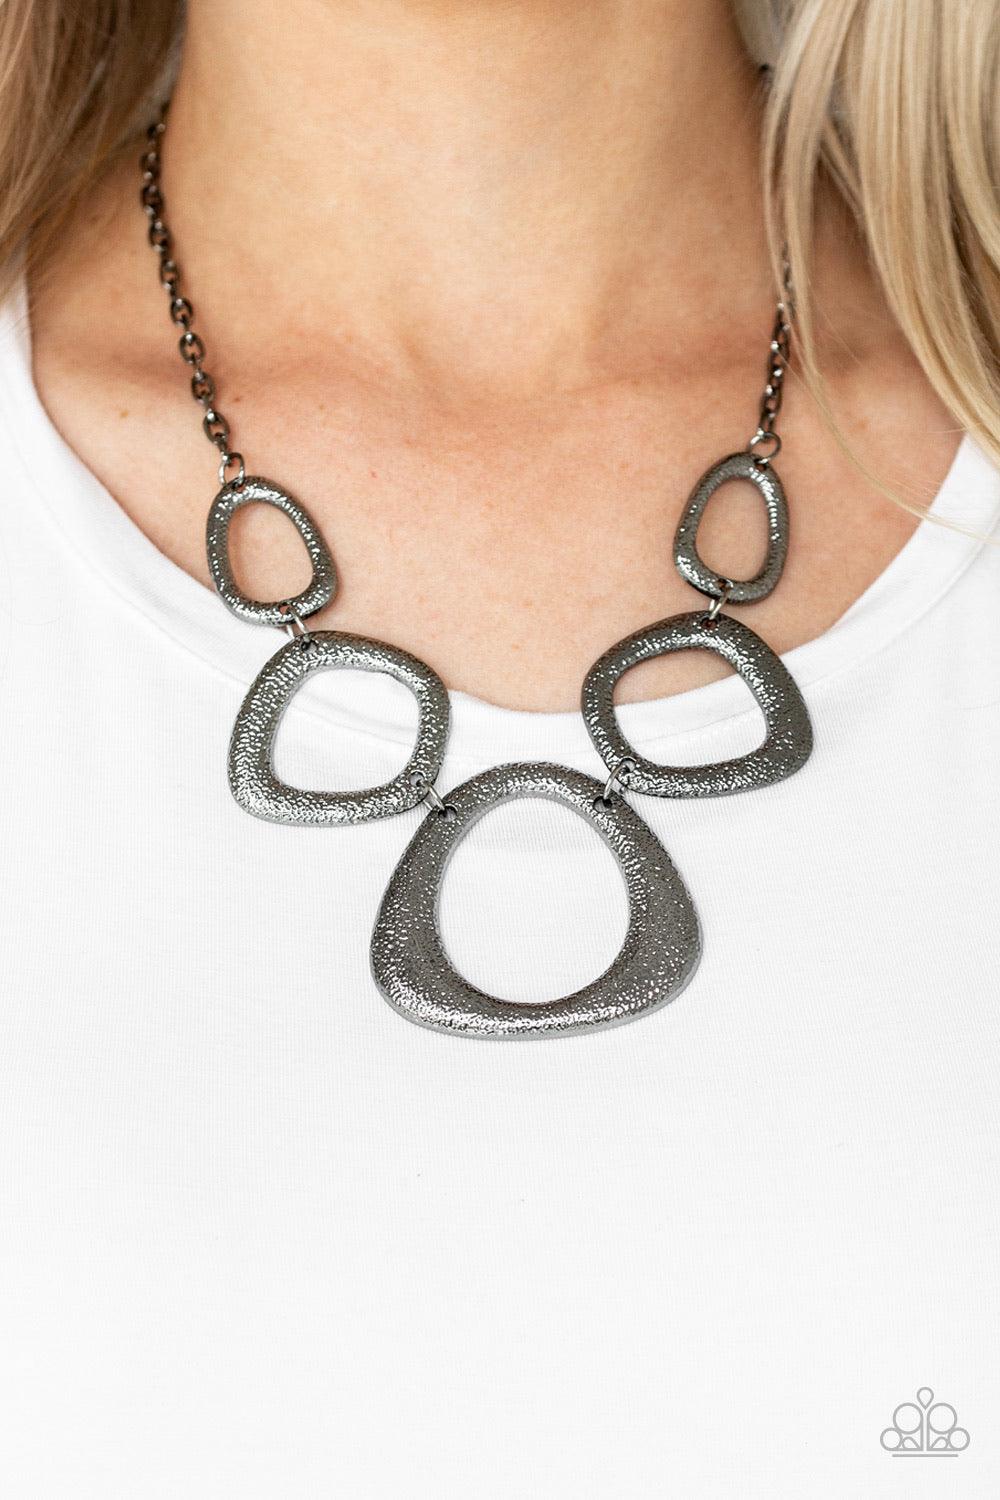 Paparazzi Accessories Backstreet Bandit - Black Hammered in a high-sheen finish, asymmetrical gunmetal frames link below the collar in an edgy statement-making fashion. Features an adjustable clasp closure. Sold as one individual necklace. Includes one pa